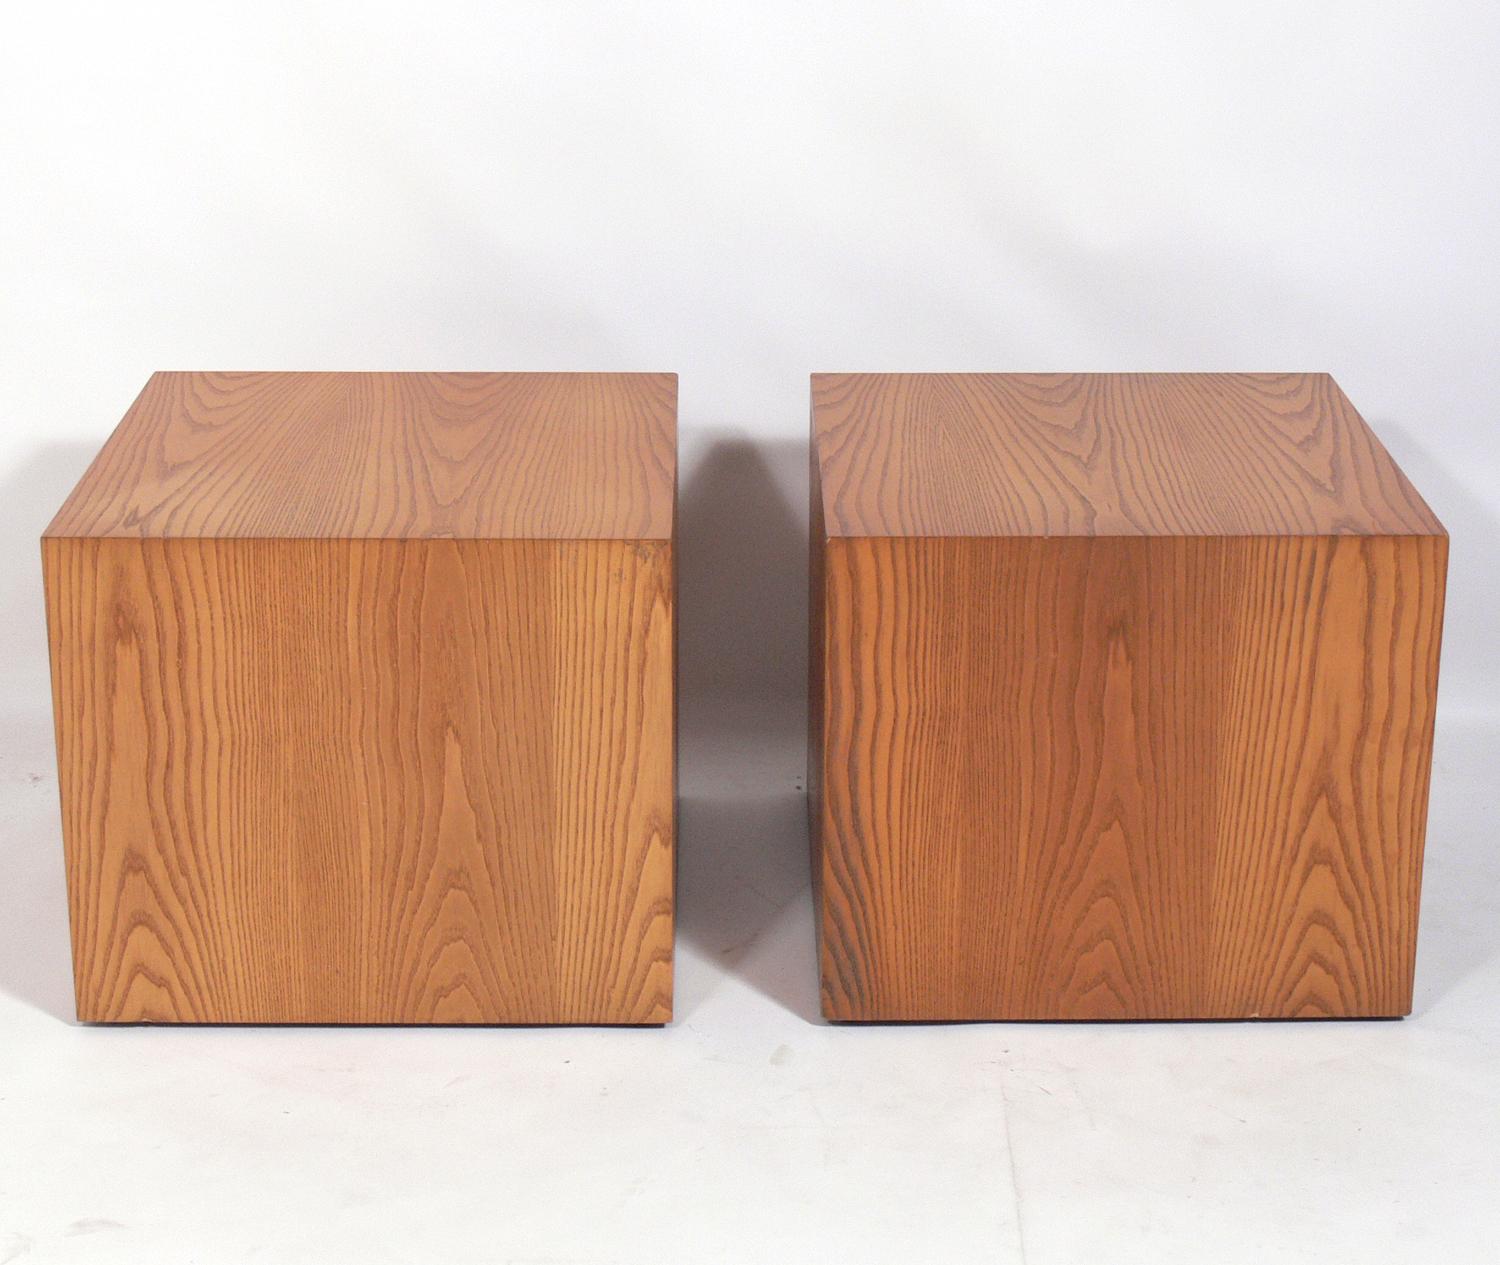 Clean lined oak cube tables, designed by Edward Axel Roffman, American, circa 1960s. They are a versatile size and can be used as end or side tables, or as night stands or pedestals for artwork. They retain their warm original patina.